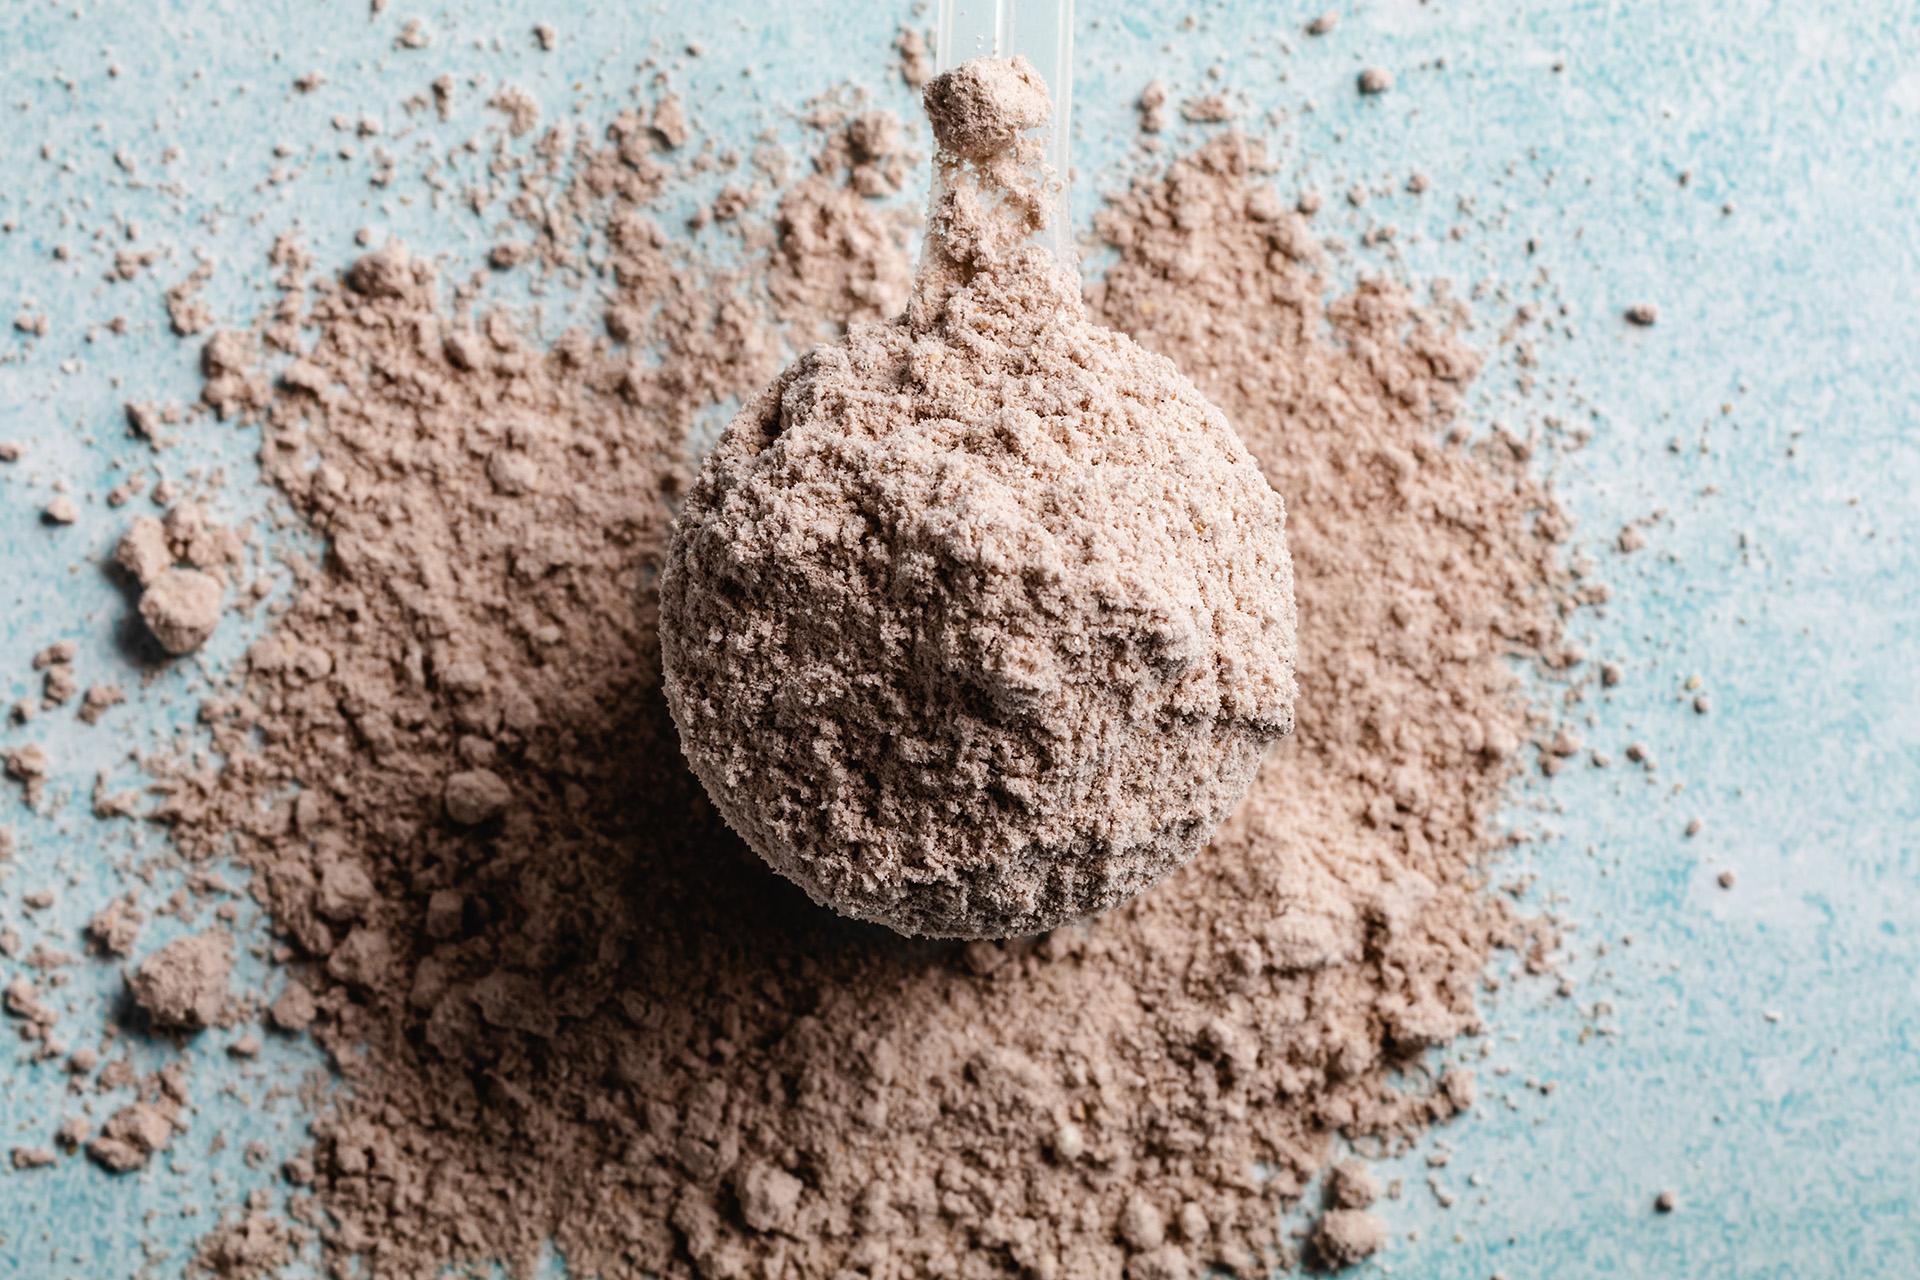 Protein Powder for Diabetes: What are its Benefits and Side Effects?